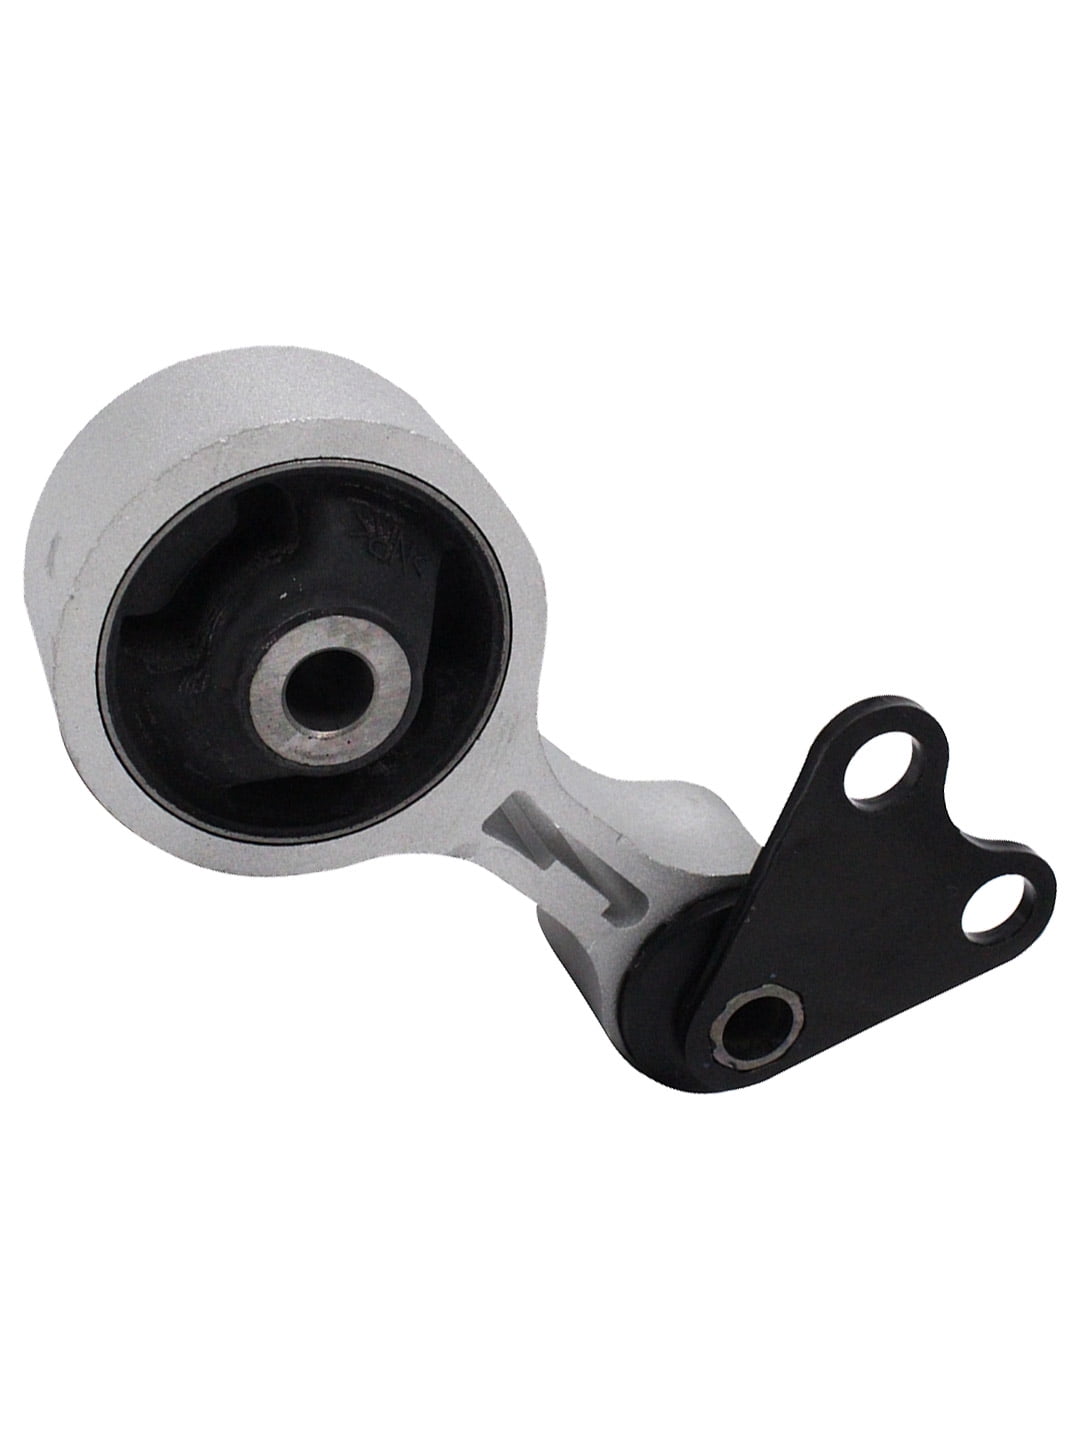 New Engine Mount Compatible with 2004 Mazda 6 3.0L V6